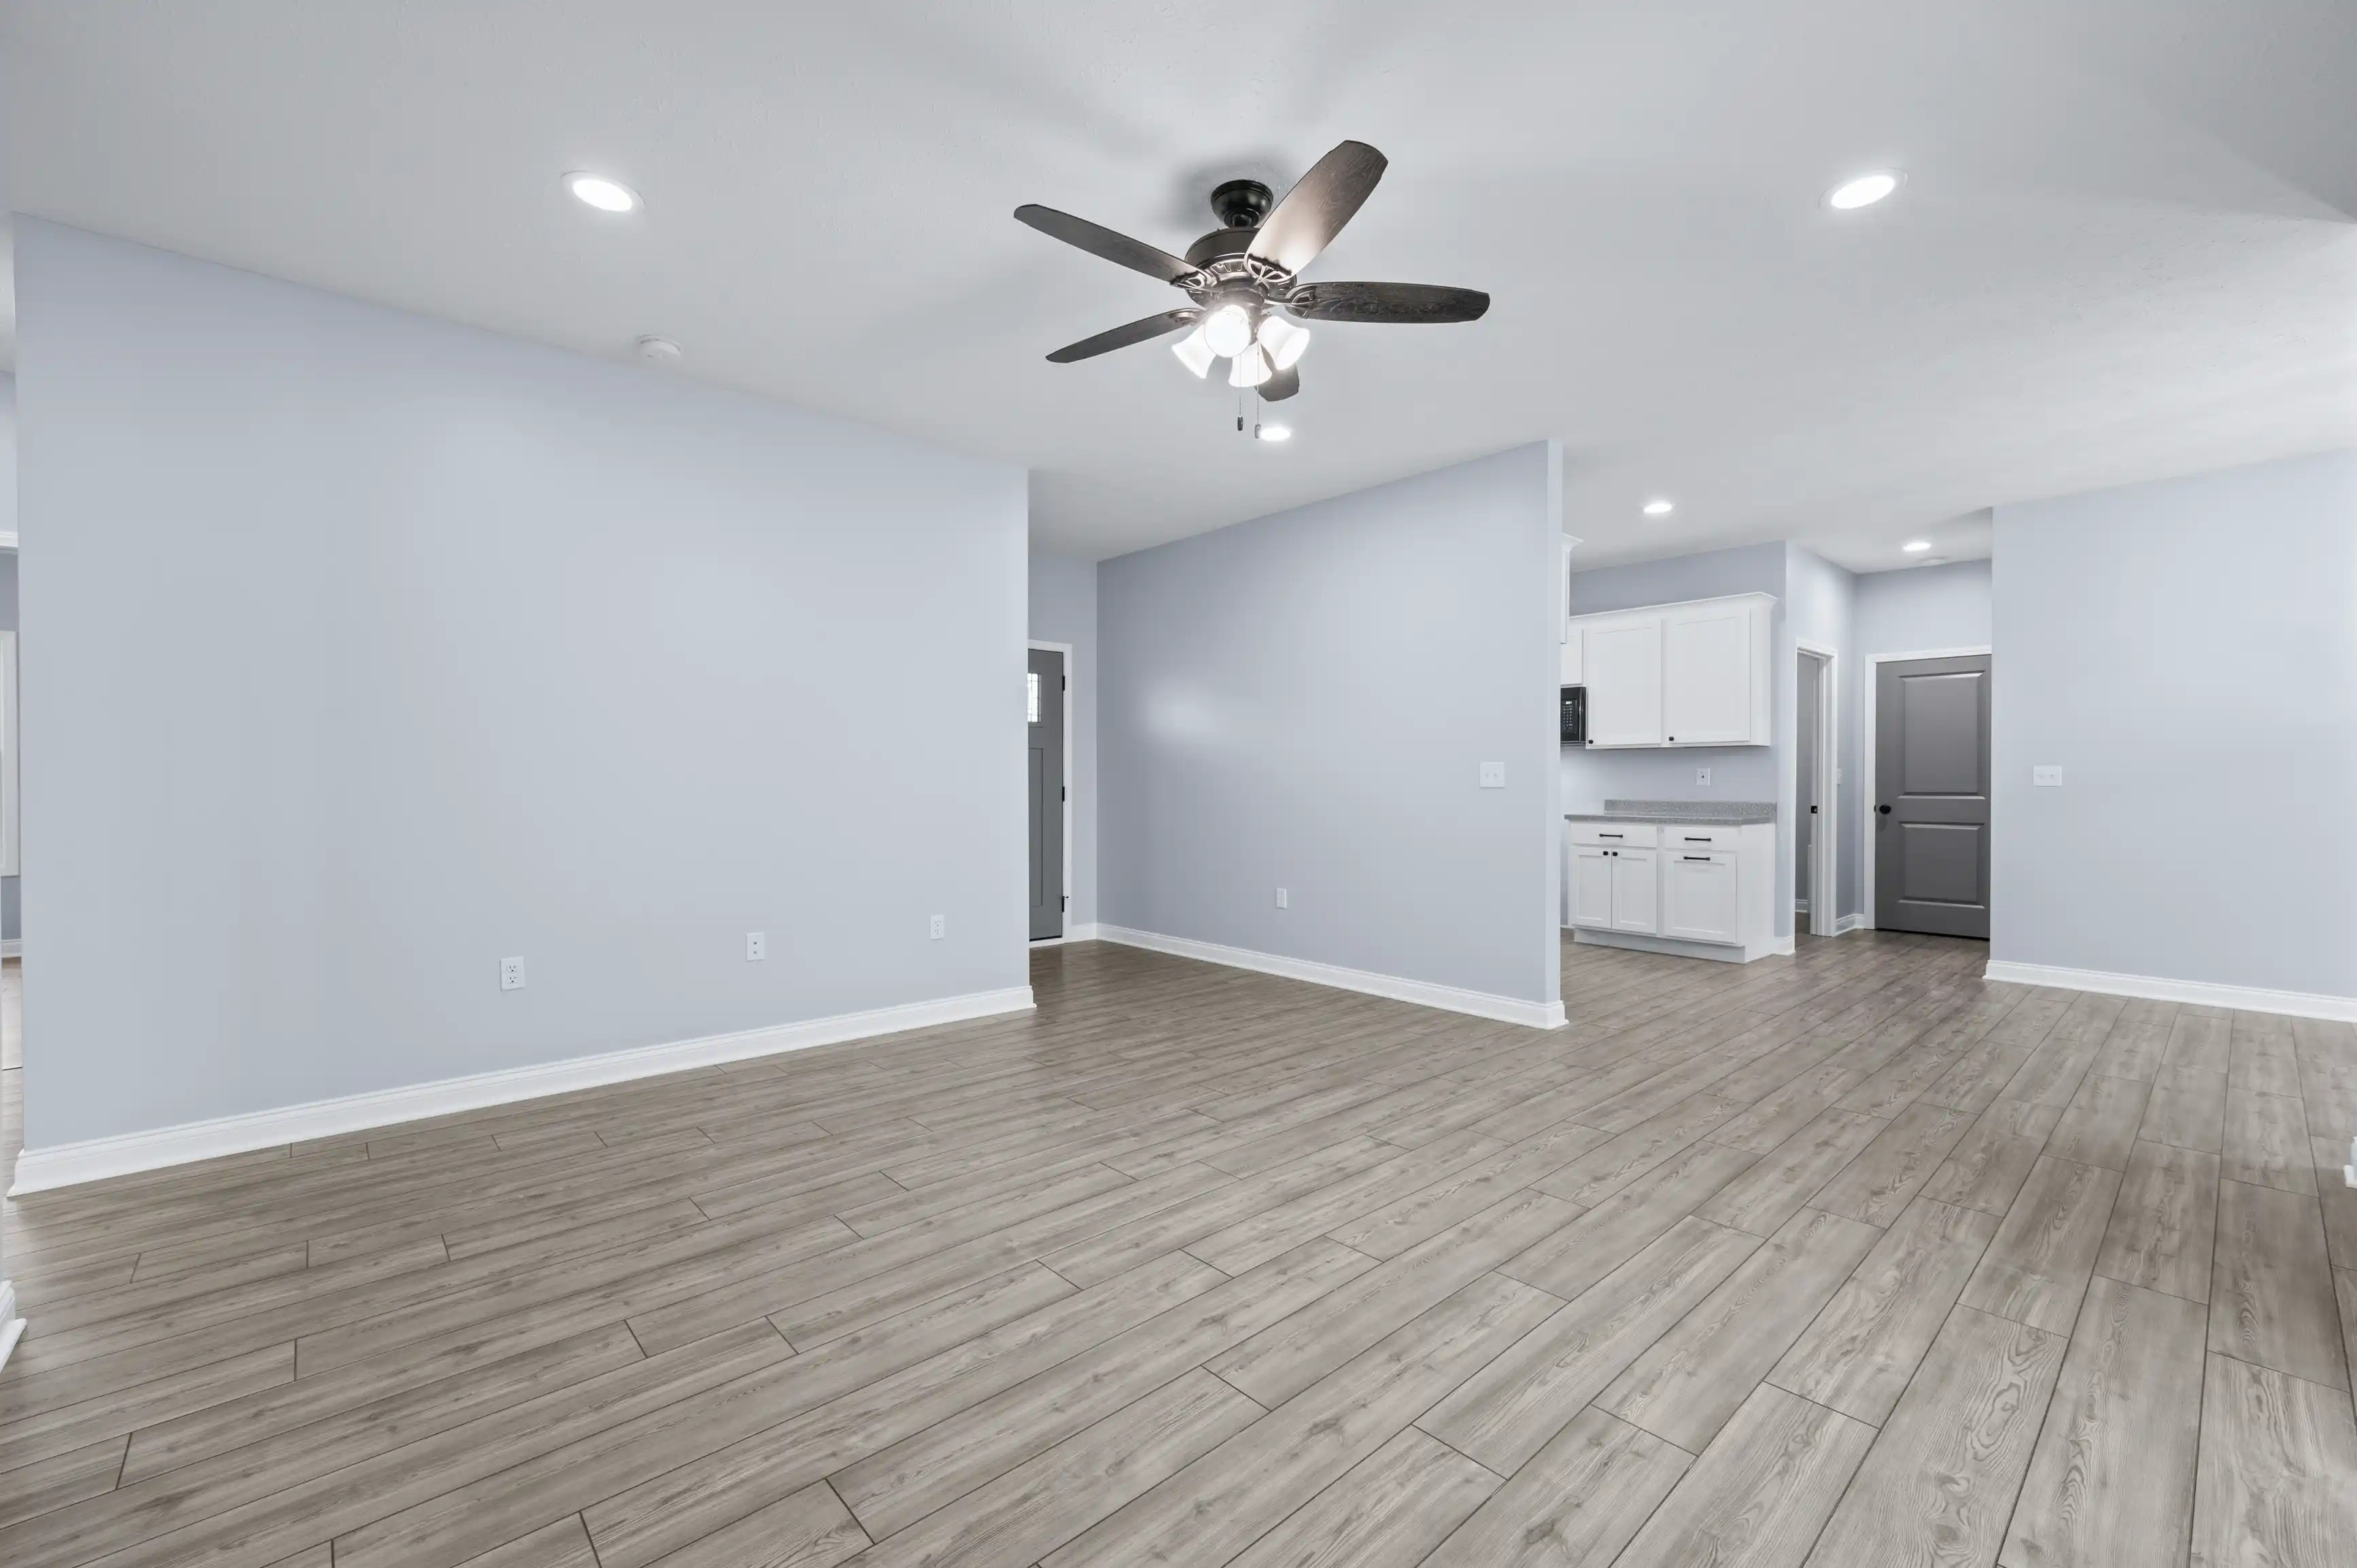 Spacious, empty room with light gray walls, dark wood flooring, white trim, a ceiling fan with lights, leading into a kitchen area with white cabinets and appliances.